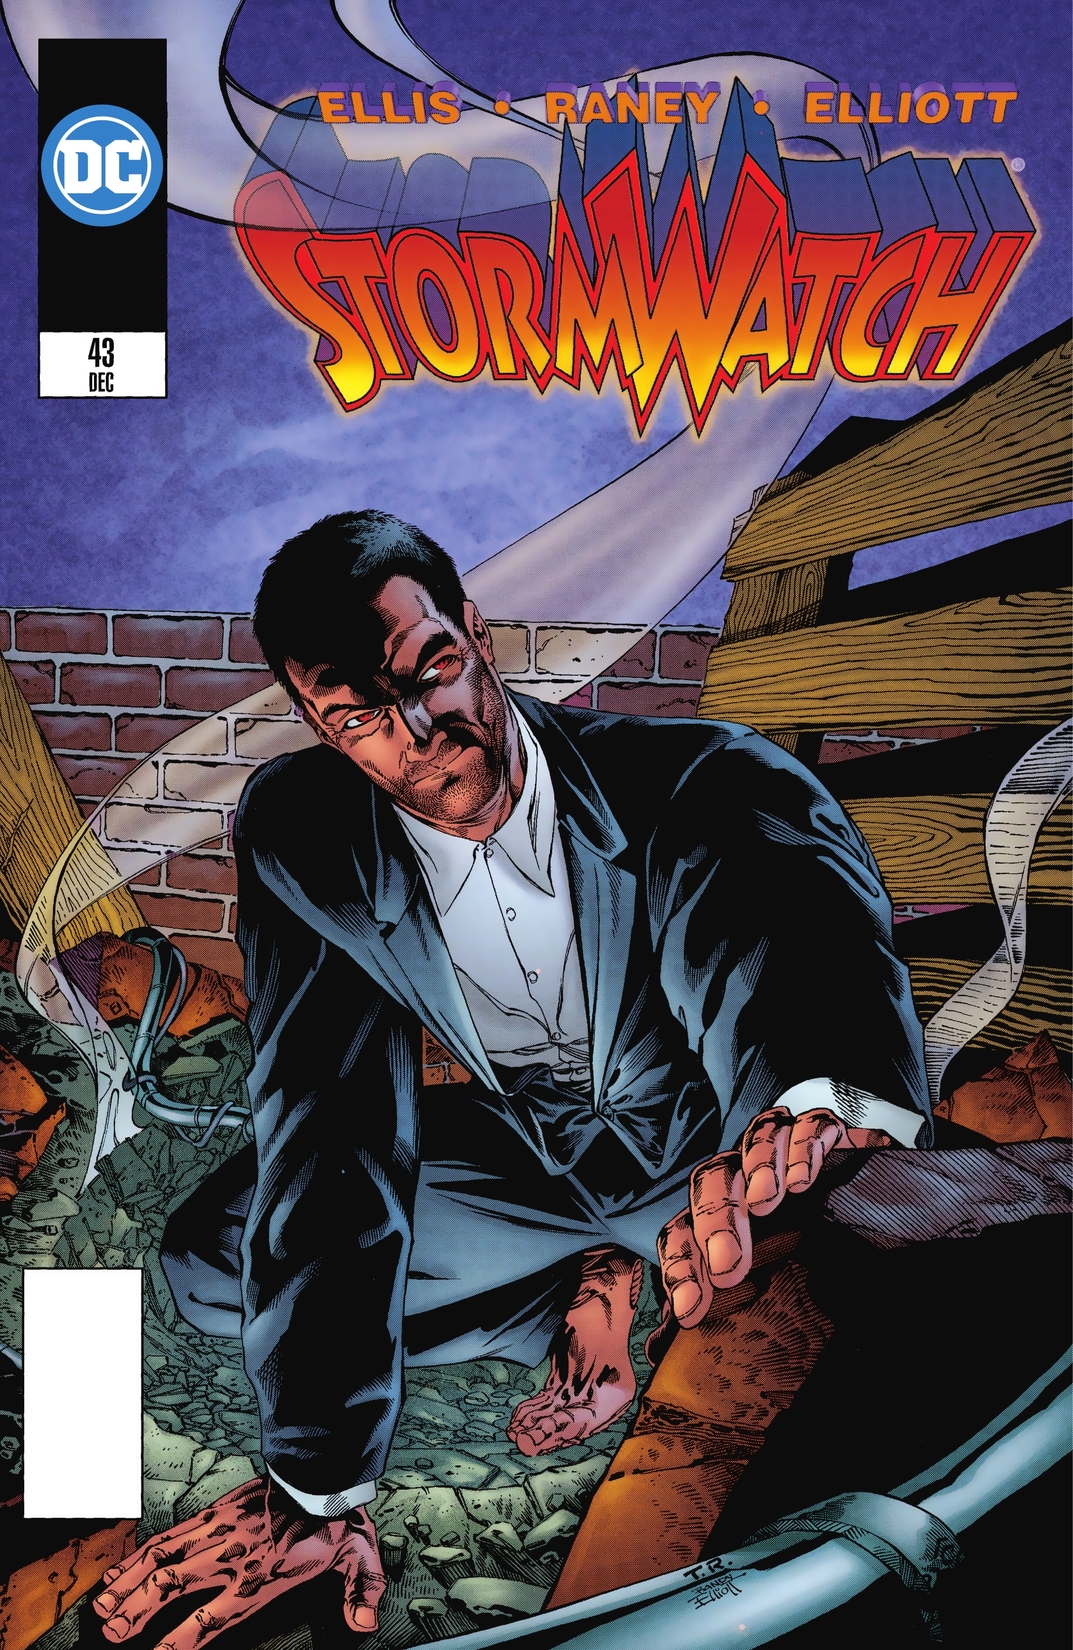 Stormwatch (1993-1997) #43 preview images